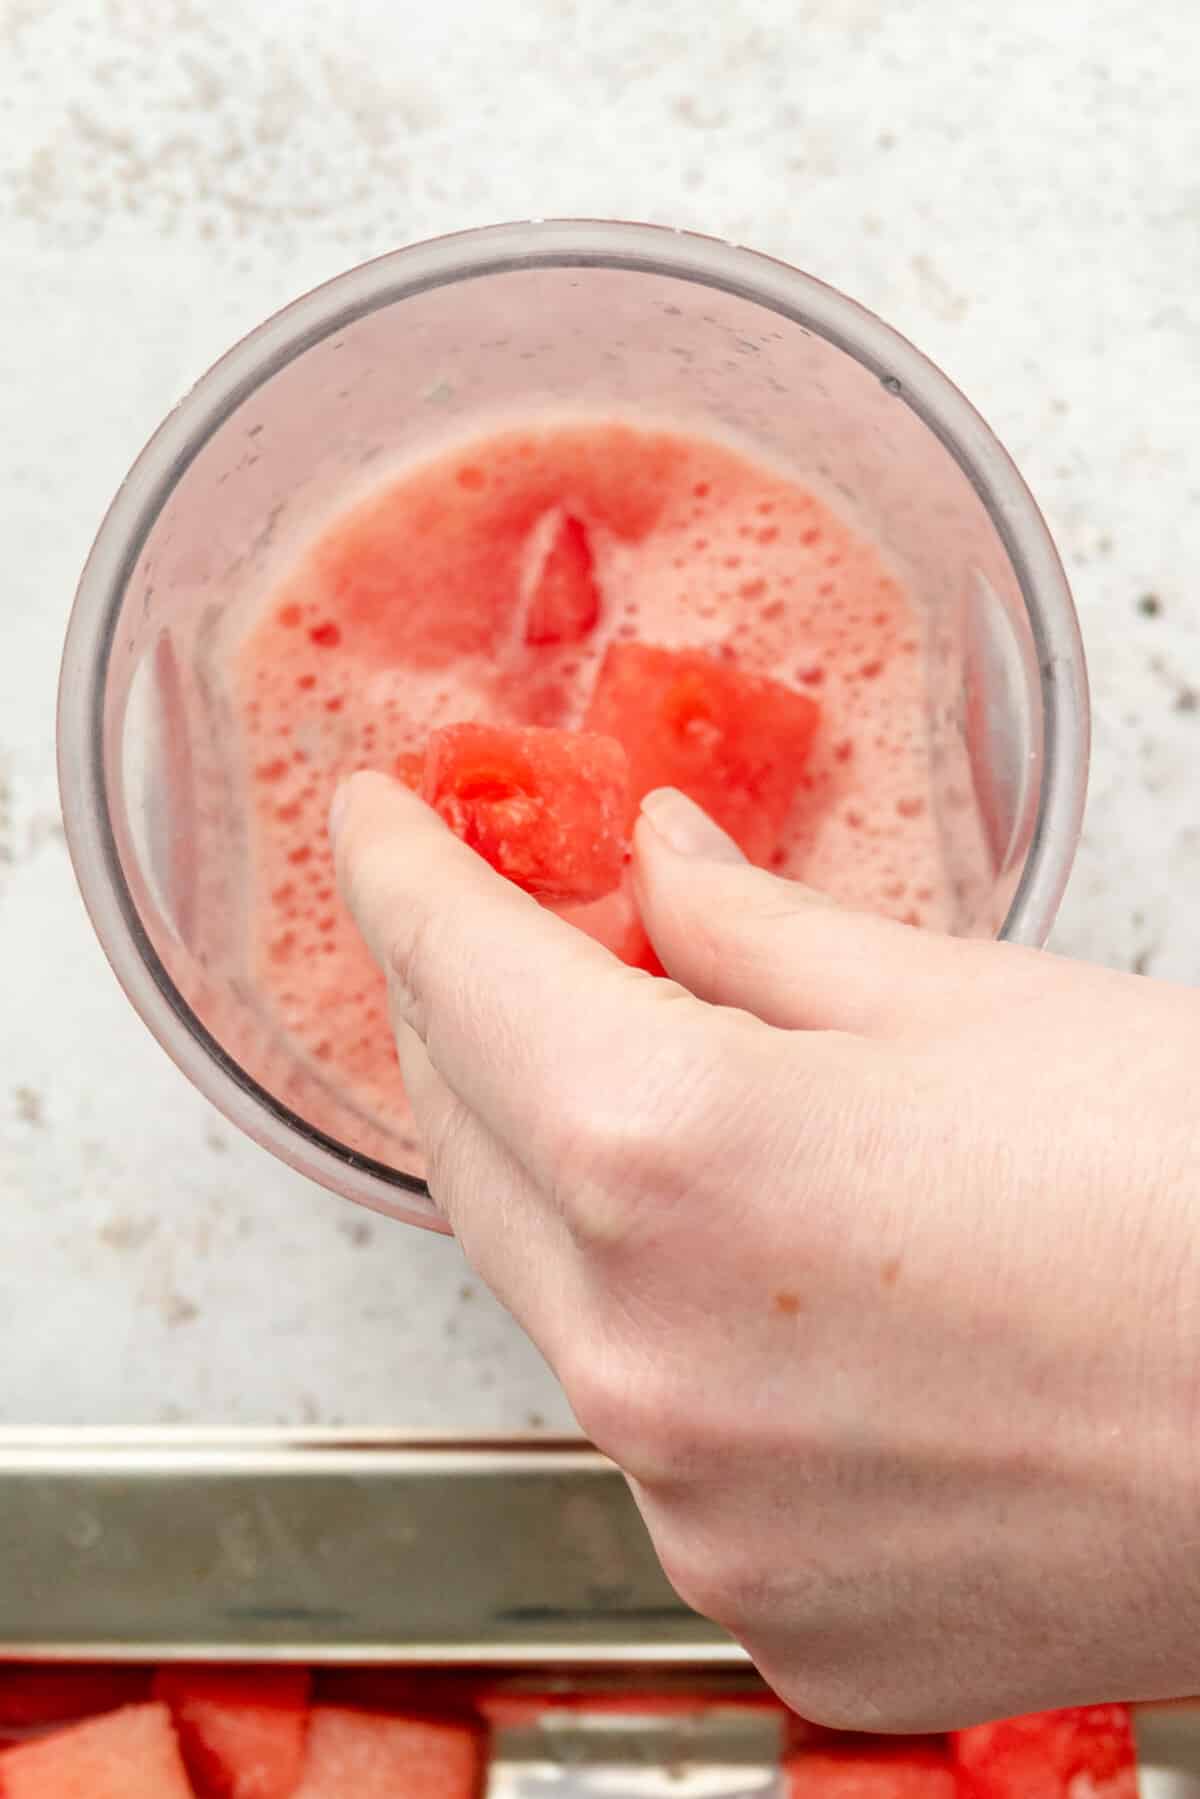 Cubes of frozen margaritas are tossed into a blender beaker for a watermelon margaritas on a light grey surface.